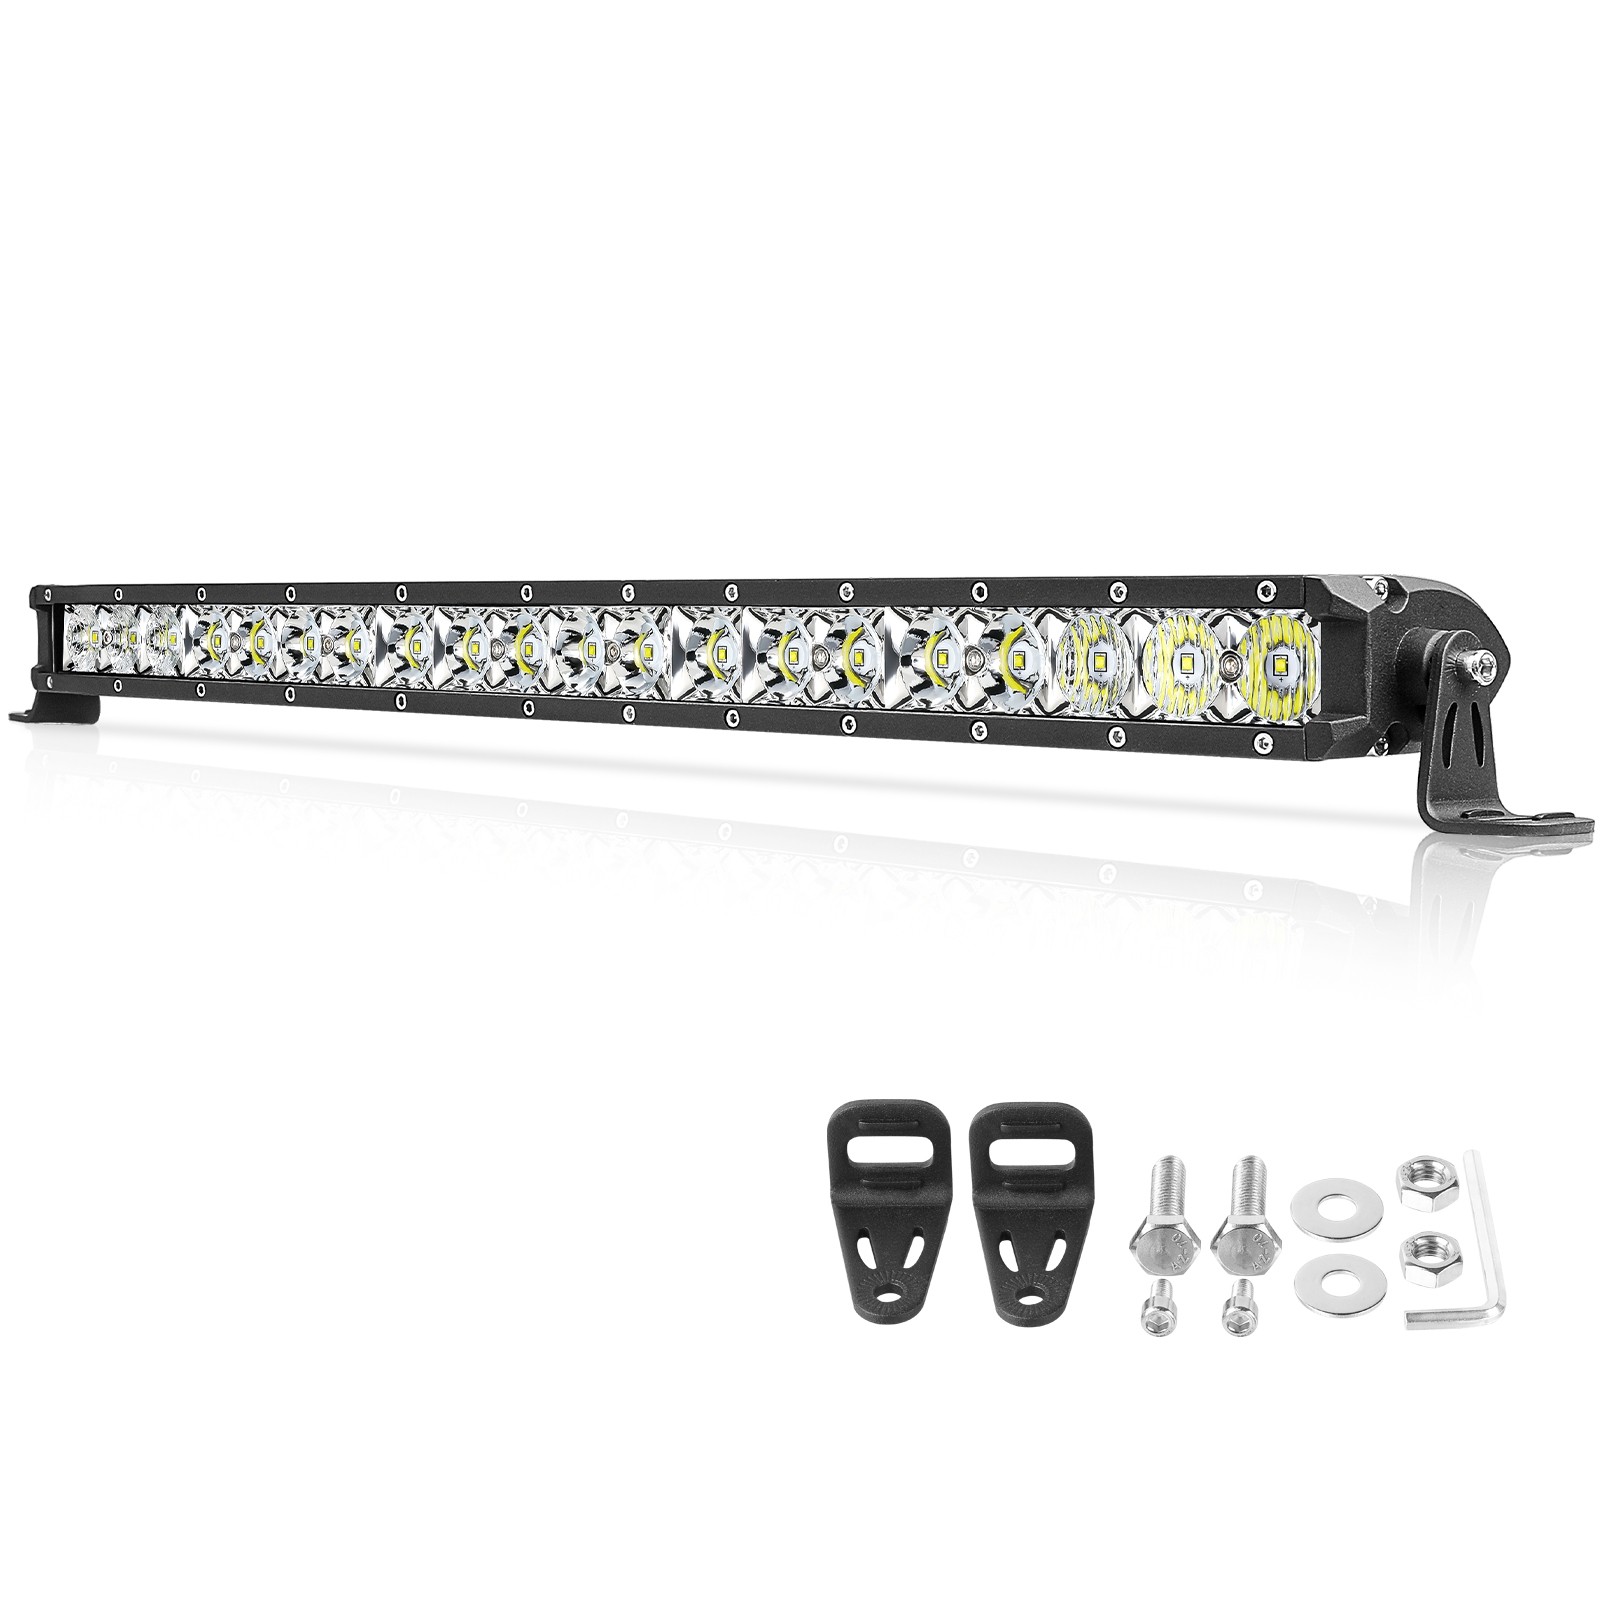 OFFROADTOWN 20 Inch LED Light Bar Single Row Off Road Lights 200W